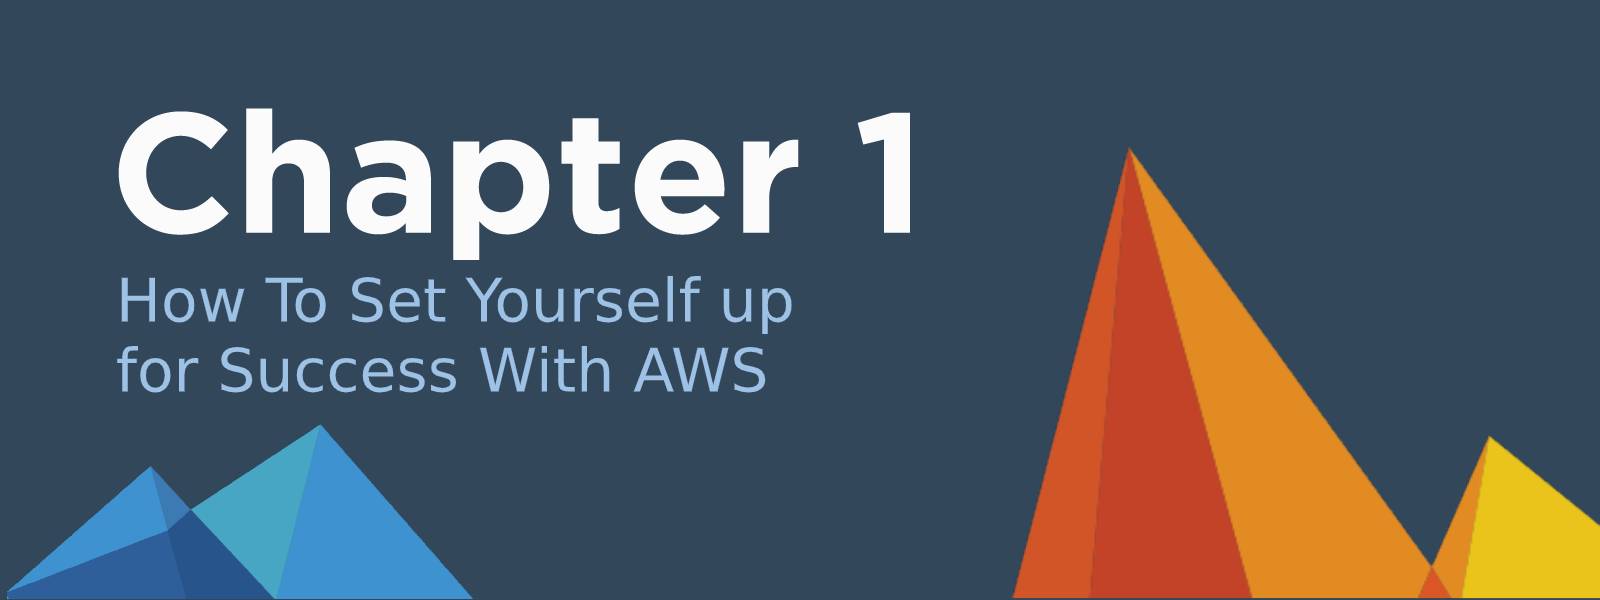 How to set yourself up for success with AWS - CloudZero